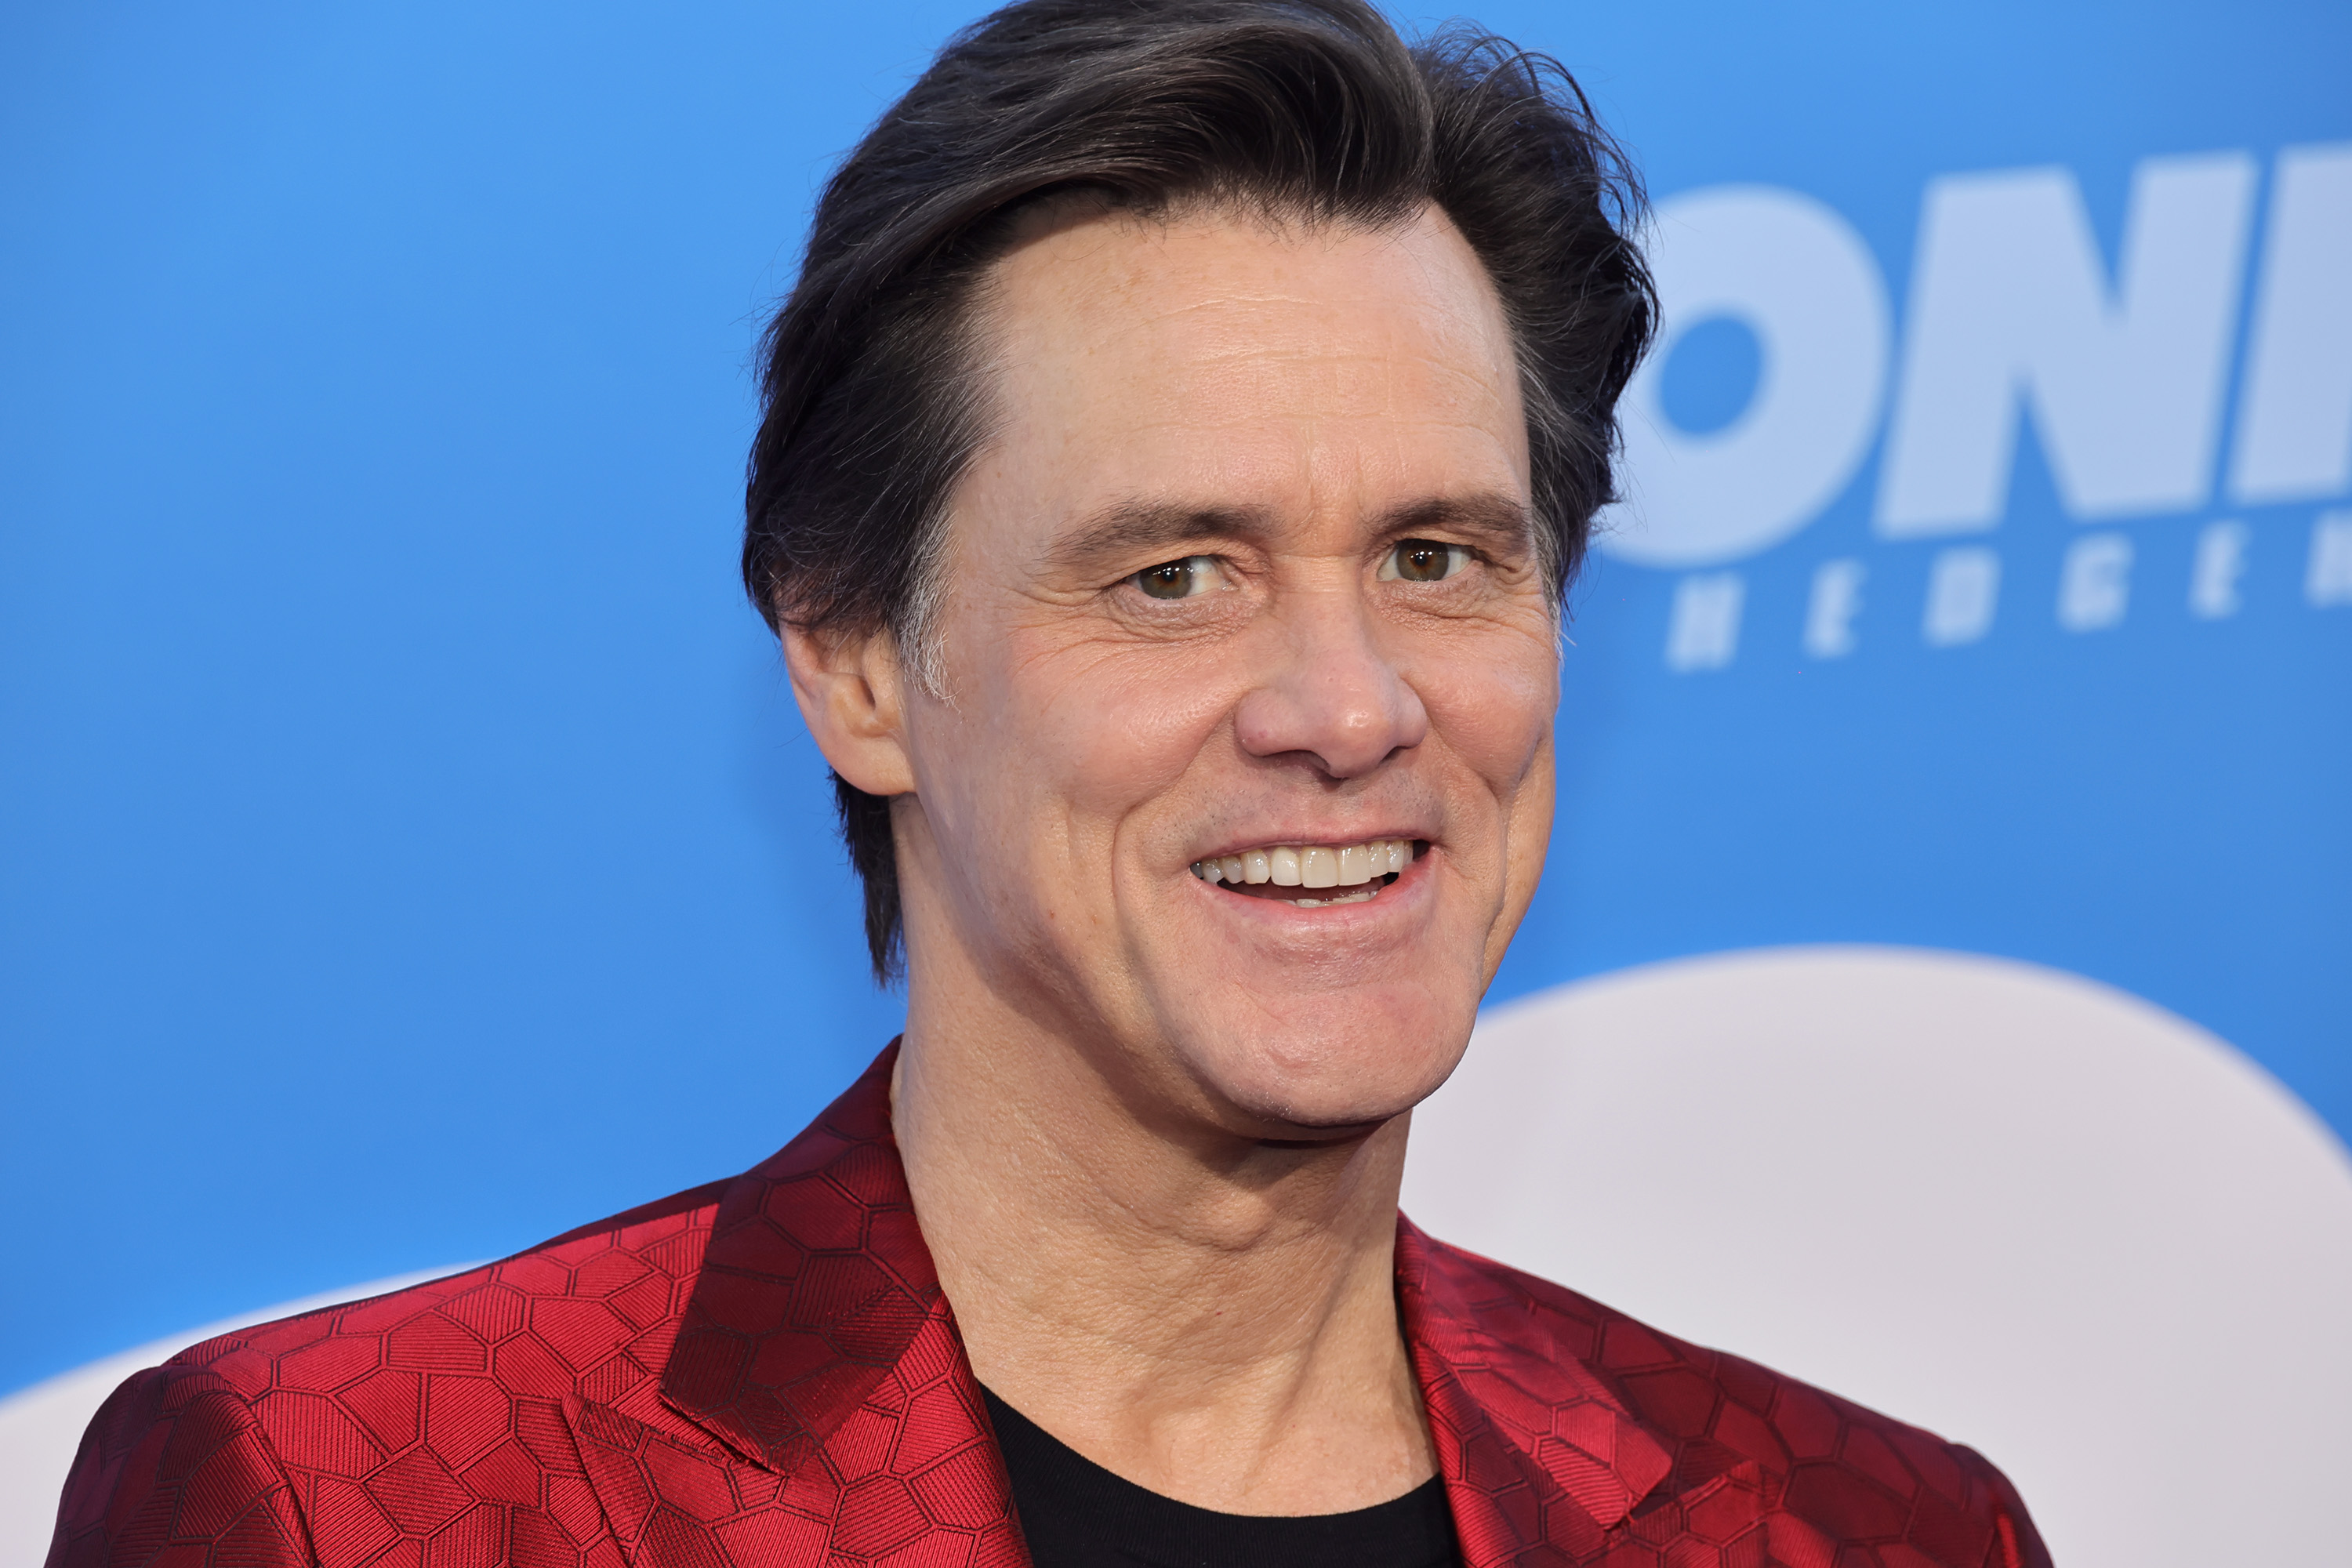 Jim Carrey attends the Los Angeles premiere screening of "Sonic The Hedgehog 2" at Regency Village Theatre on April 5, 2022 in Los Angeles, California | Source: Getty Images